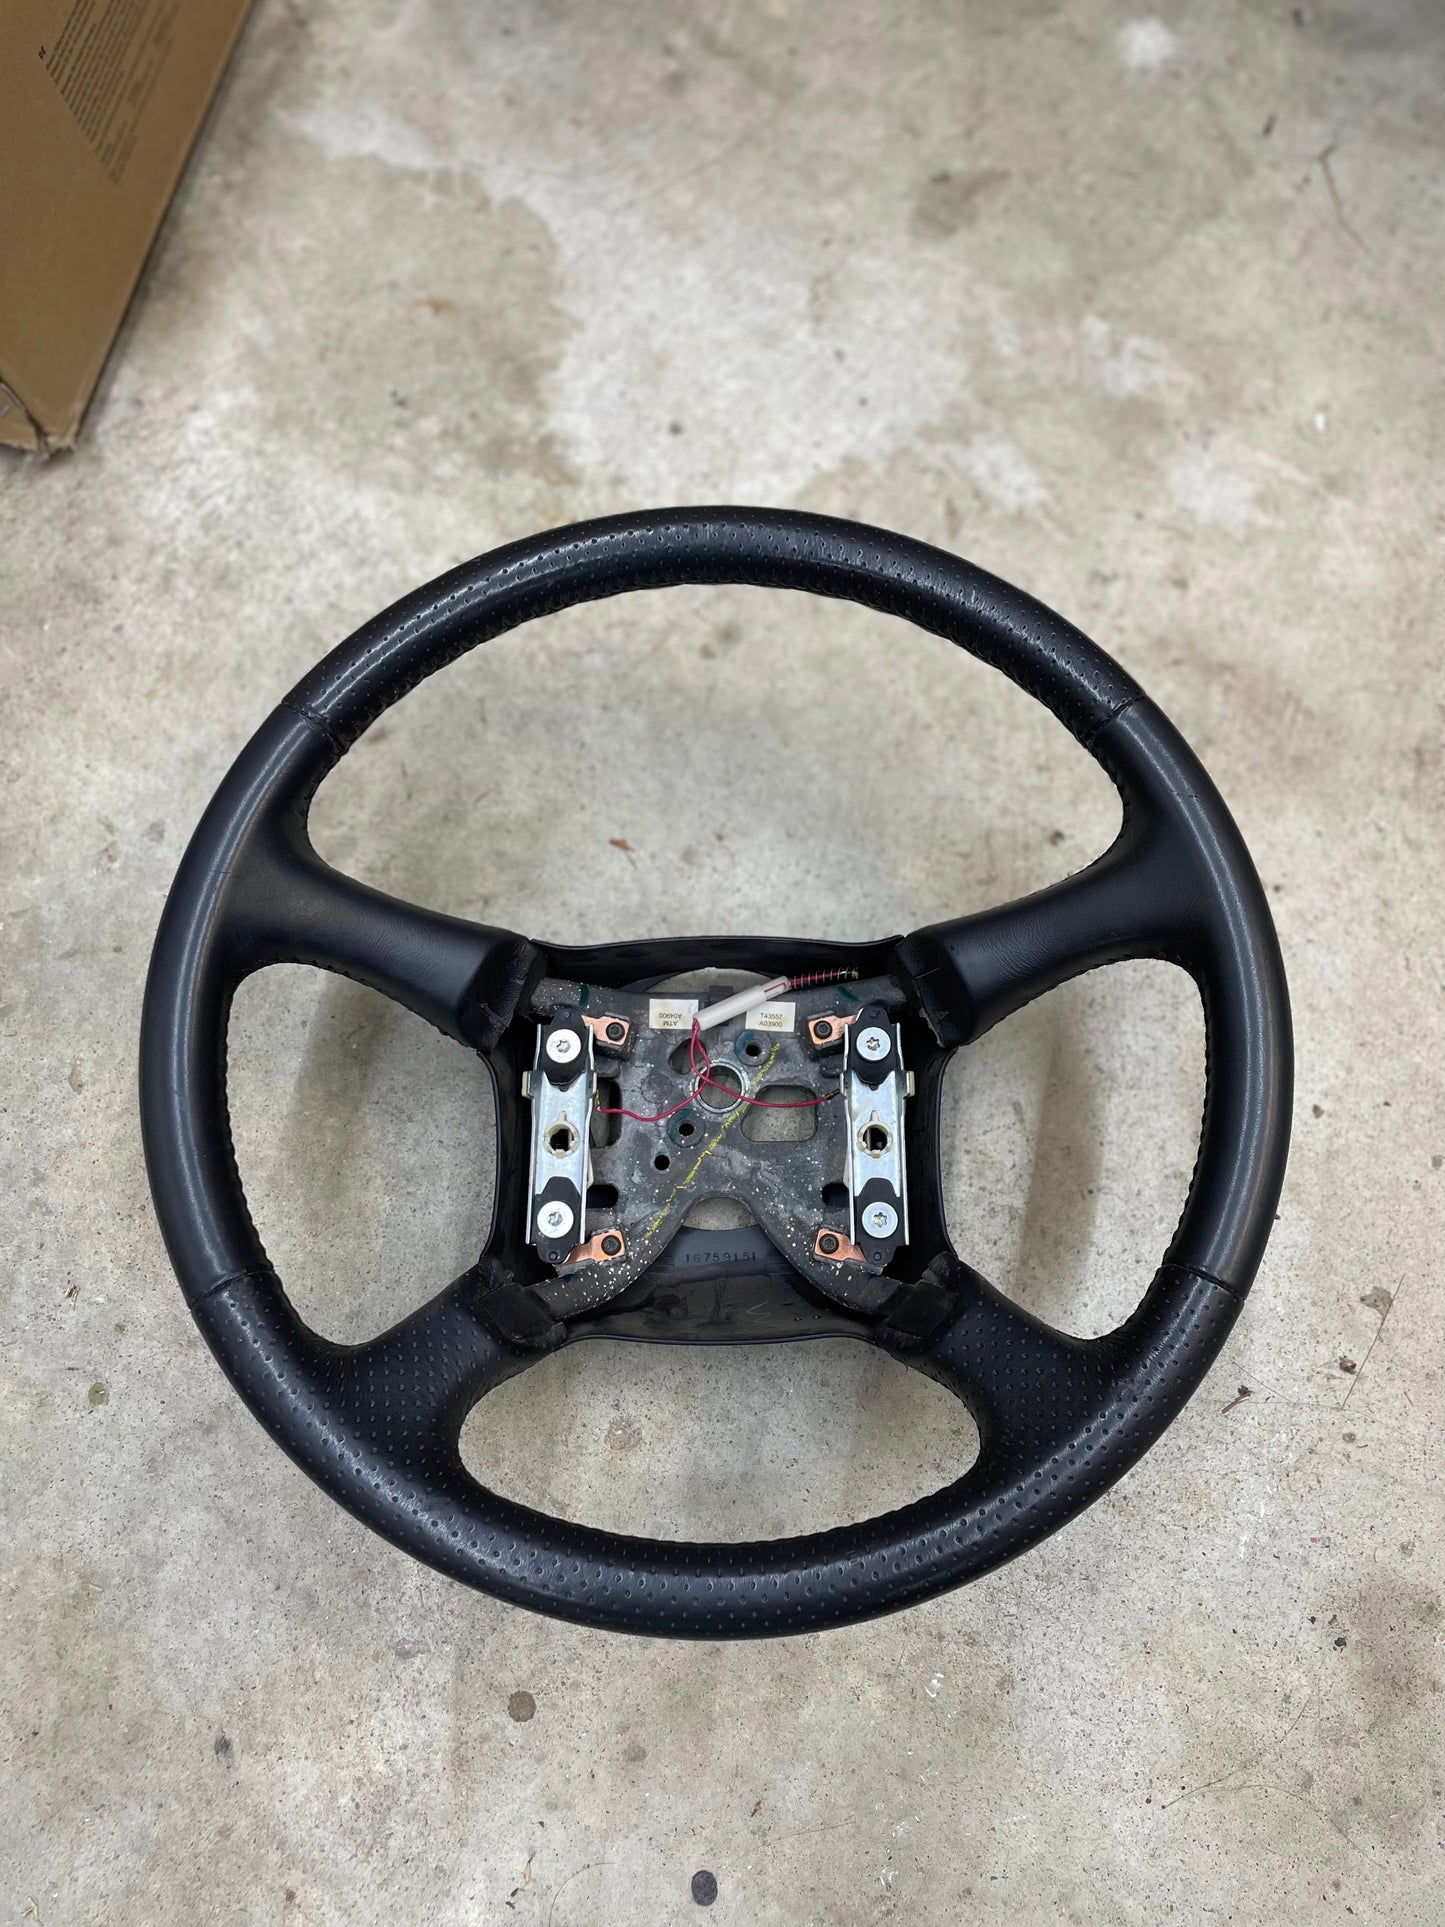 OEM Perforated Leather Steering Wheel for 1999-2005 GM Chevy Silverado S10 and more